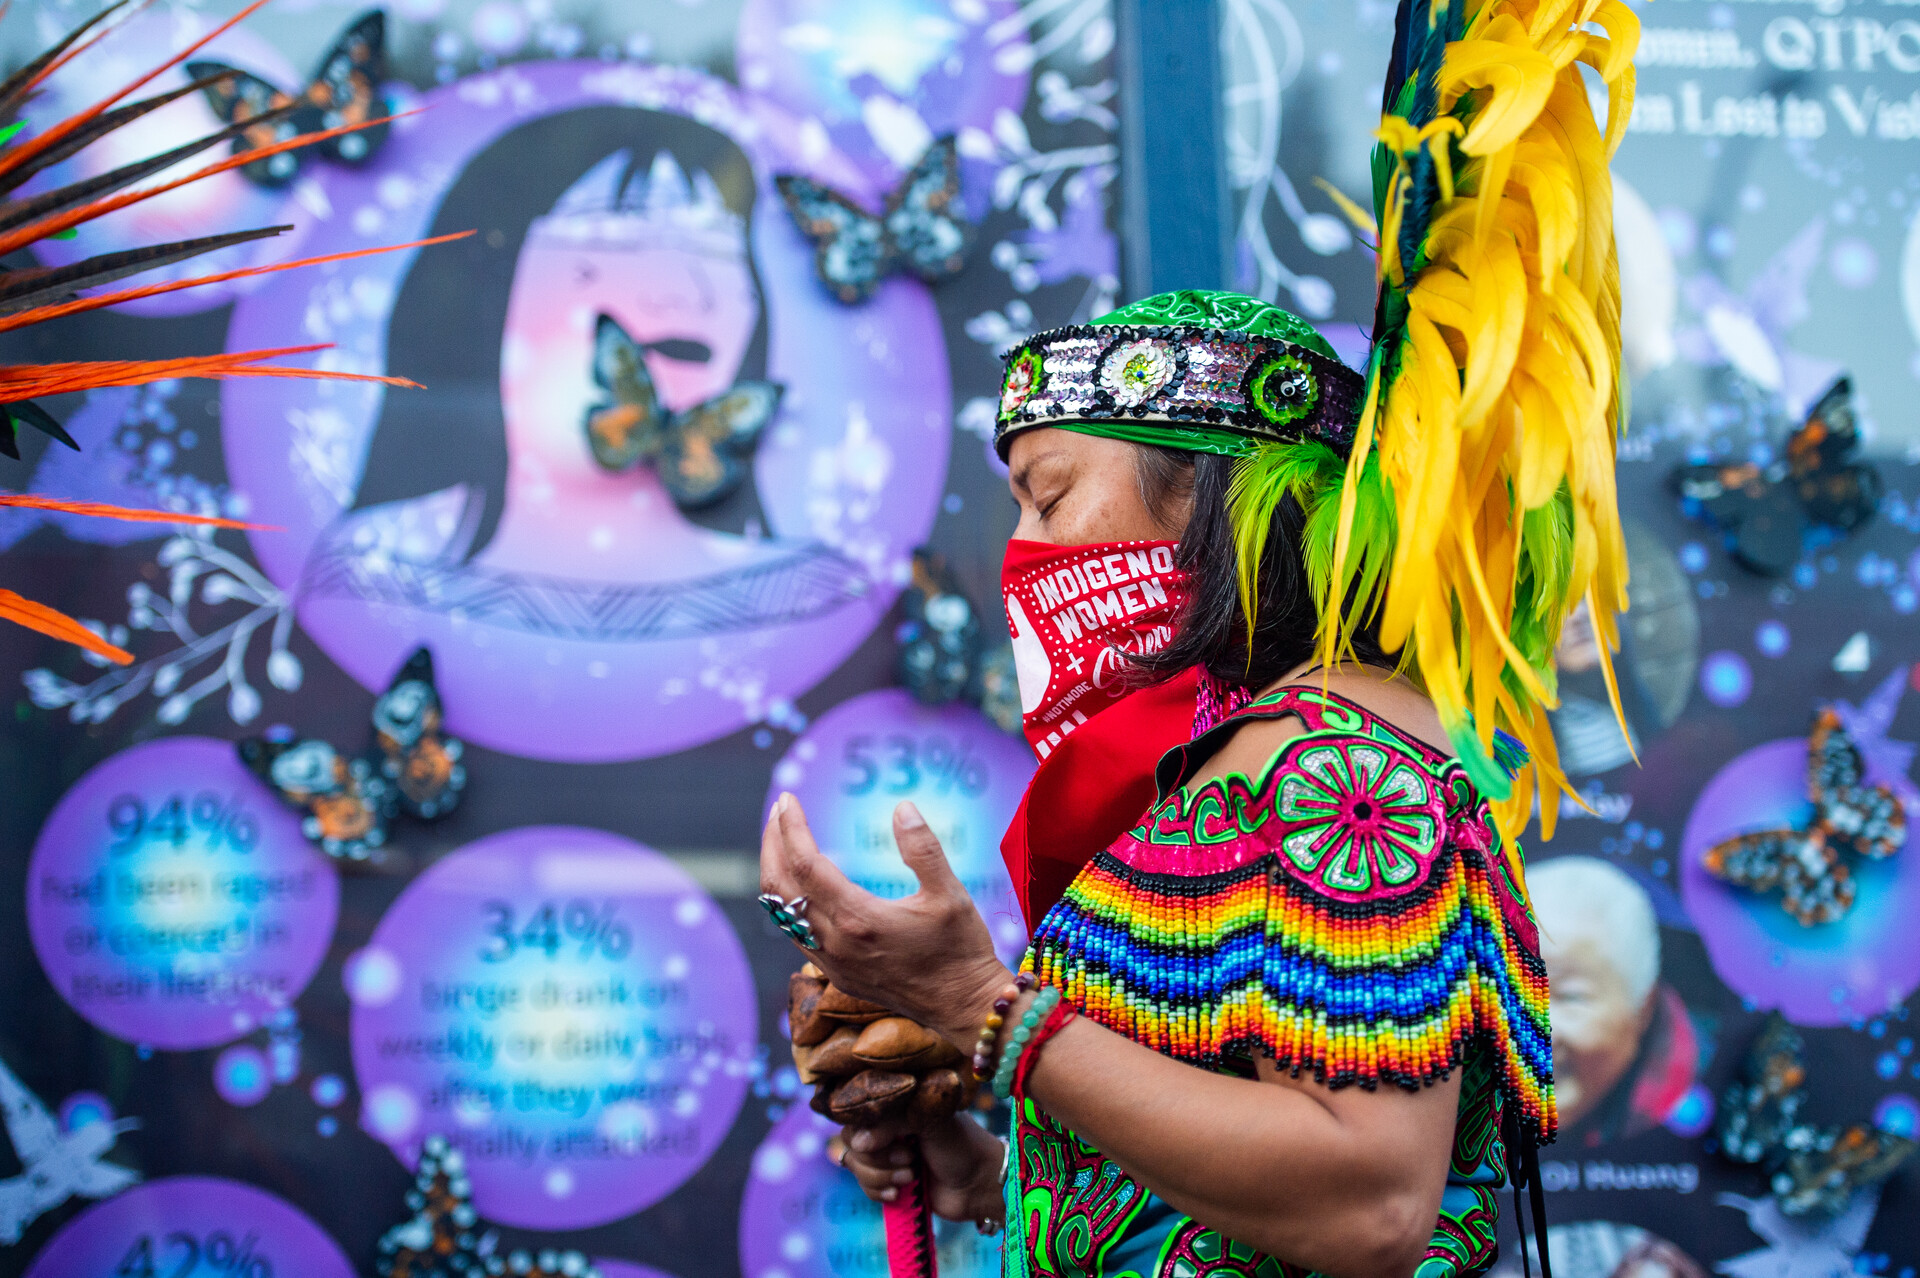 A person wearing traditional Aztec dance regalia lifts their hands up in prayer in front of a poster that shares some of the statistics on violence committed against women and queer and trans people of color.